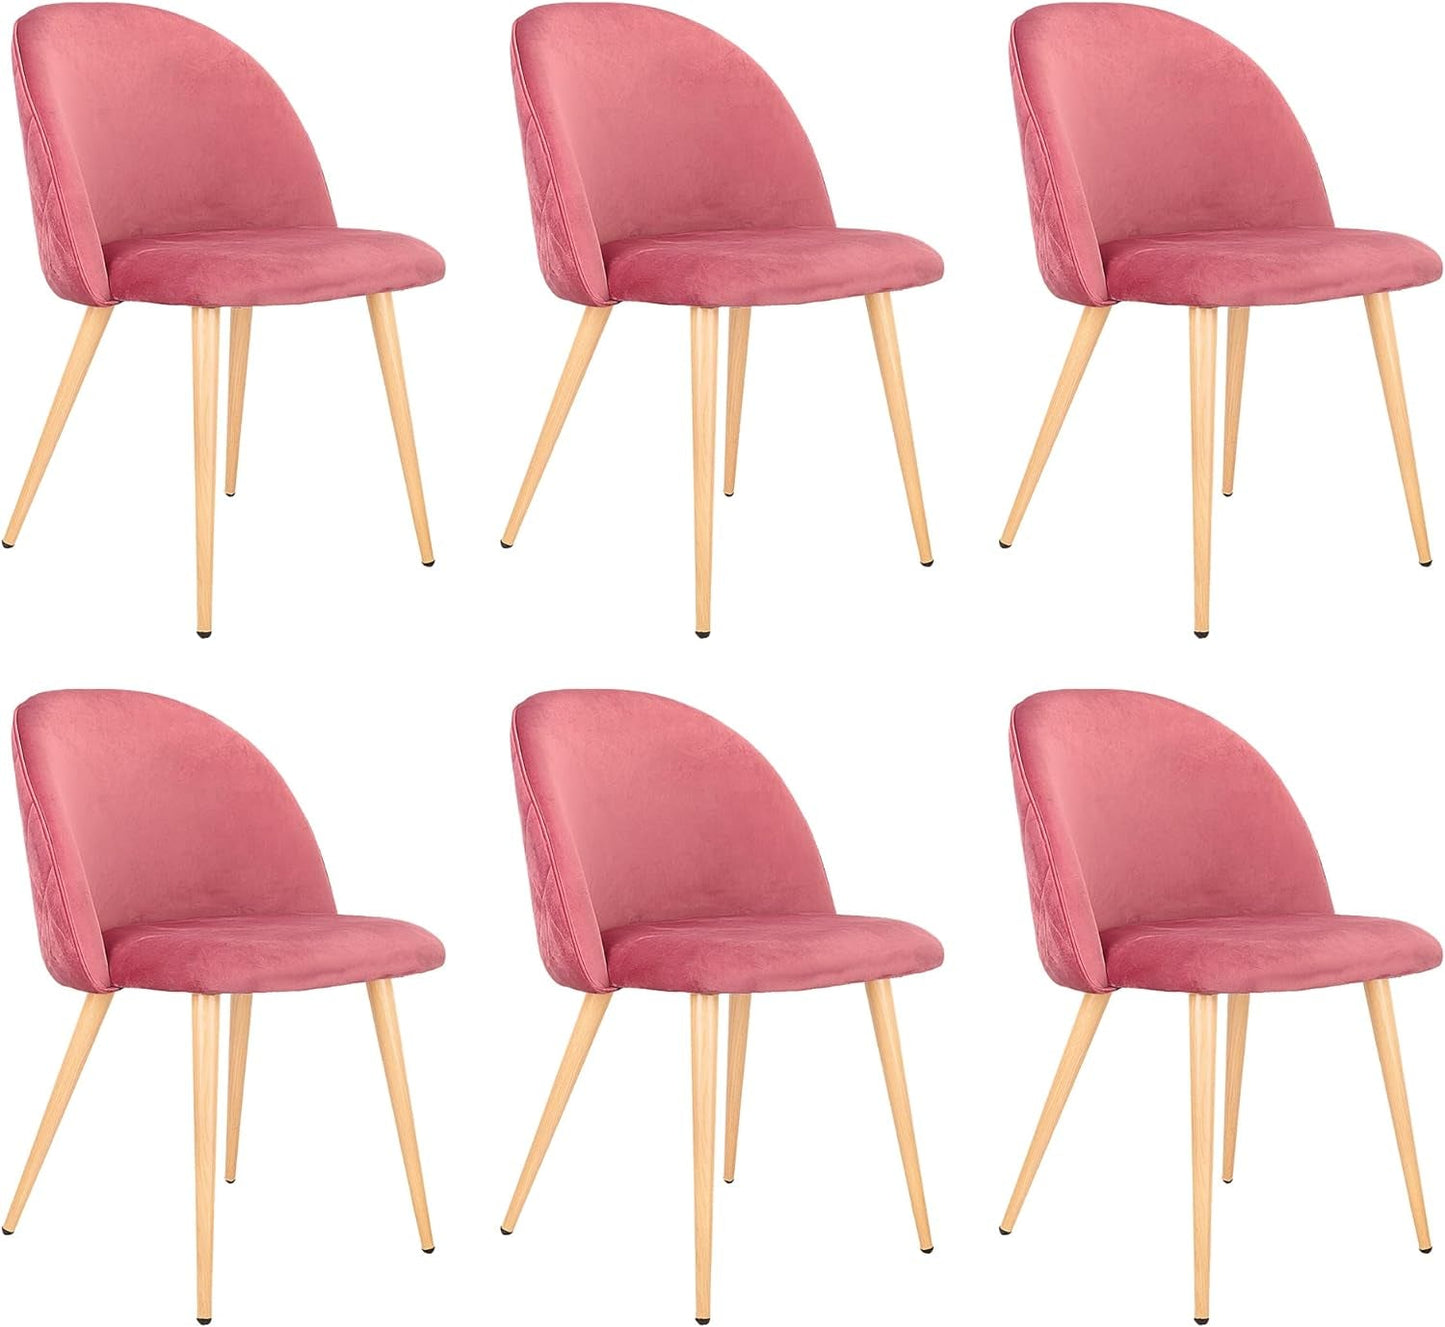 Dining Chairs Set of 2, Velvet Dining Room Chairs Modern Kitchen Chairs with Backrest Wooden Style Metal Legs for Dining Room Living Room Restaurant Cafe Kitchen Pink